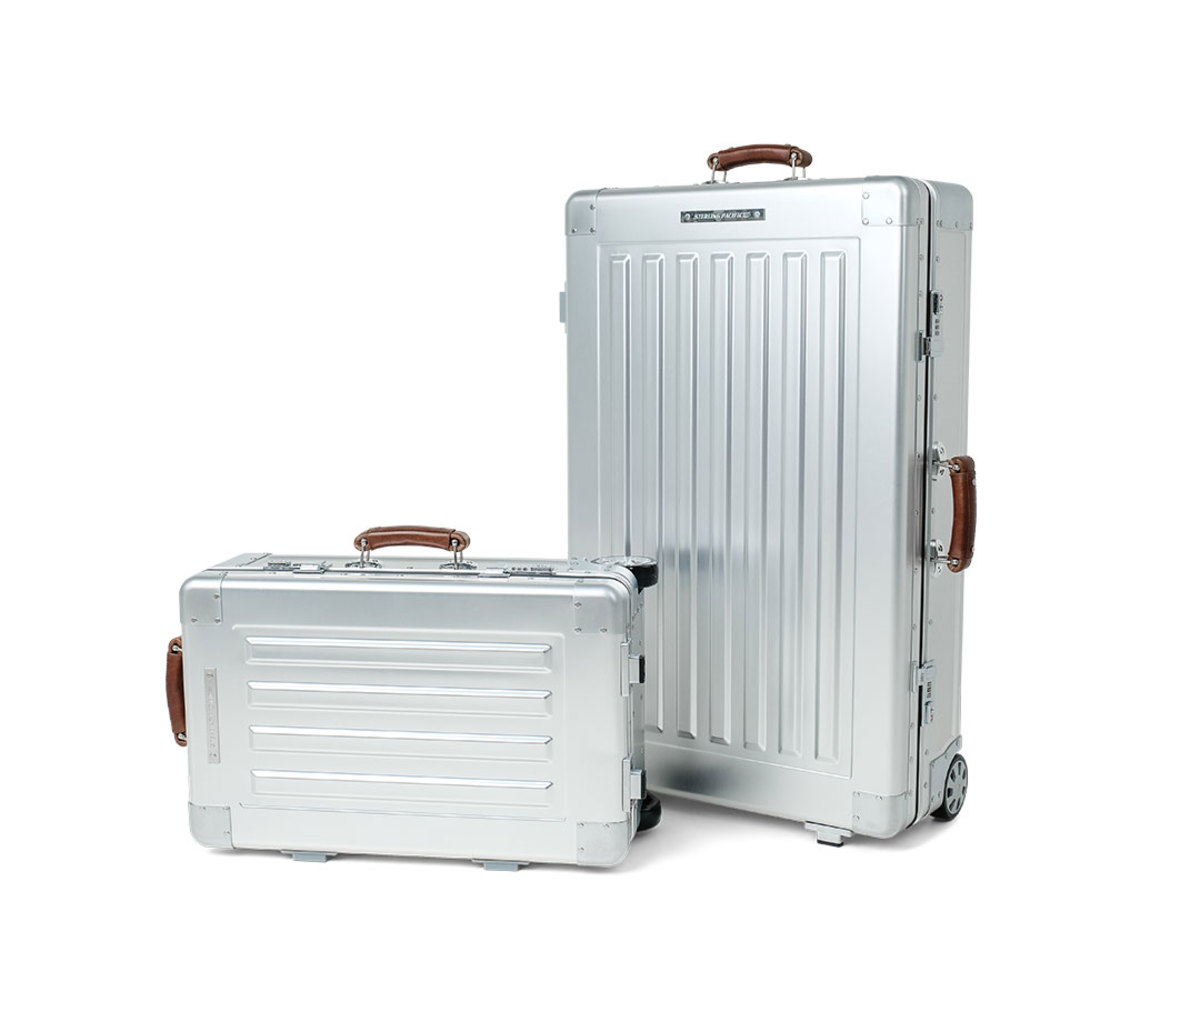 Sterling Pacific 35L Cabin Travel Case